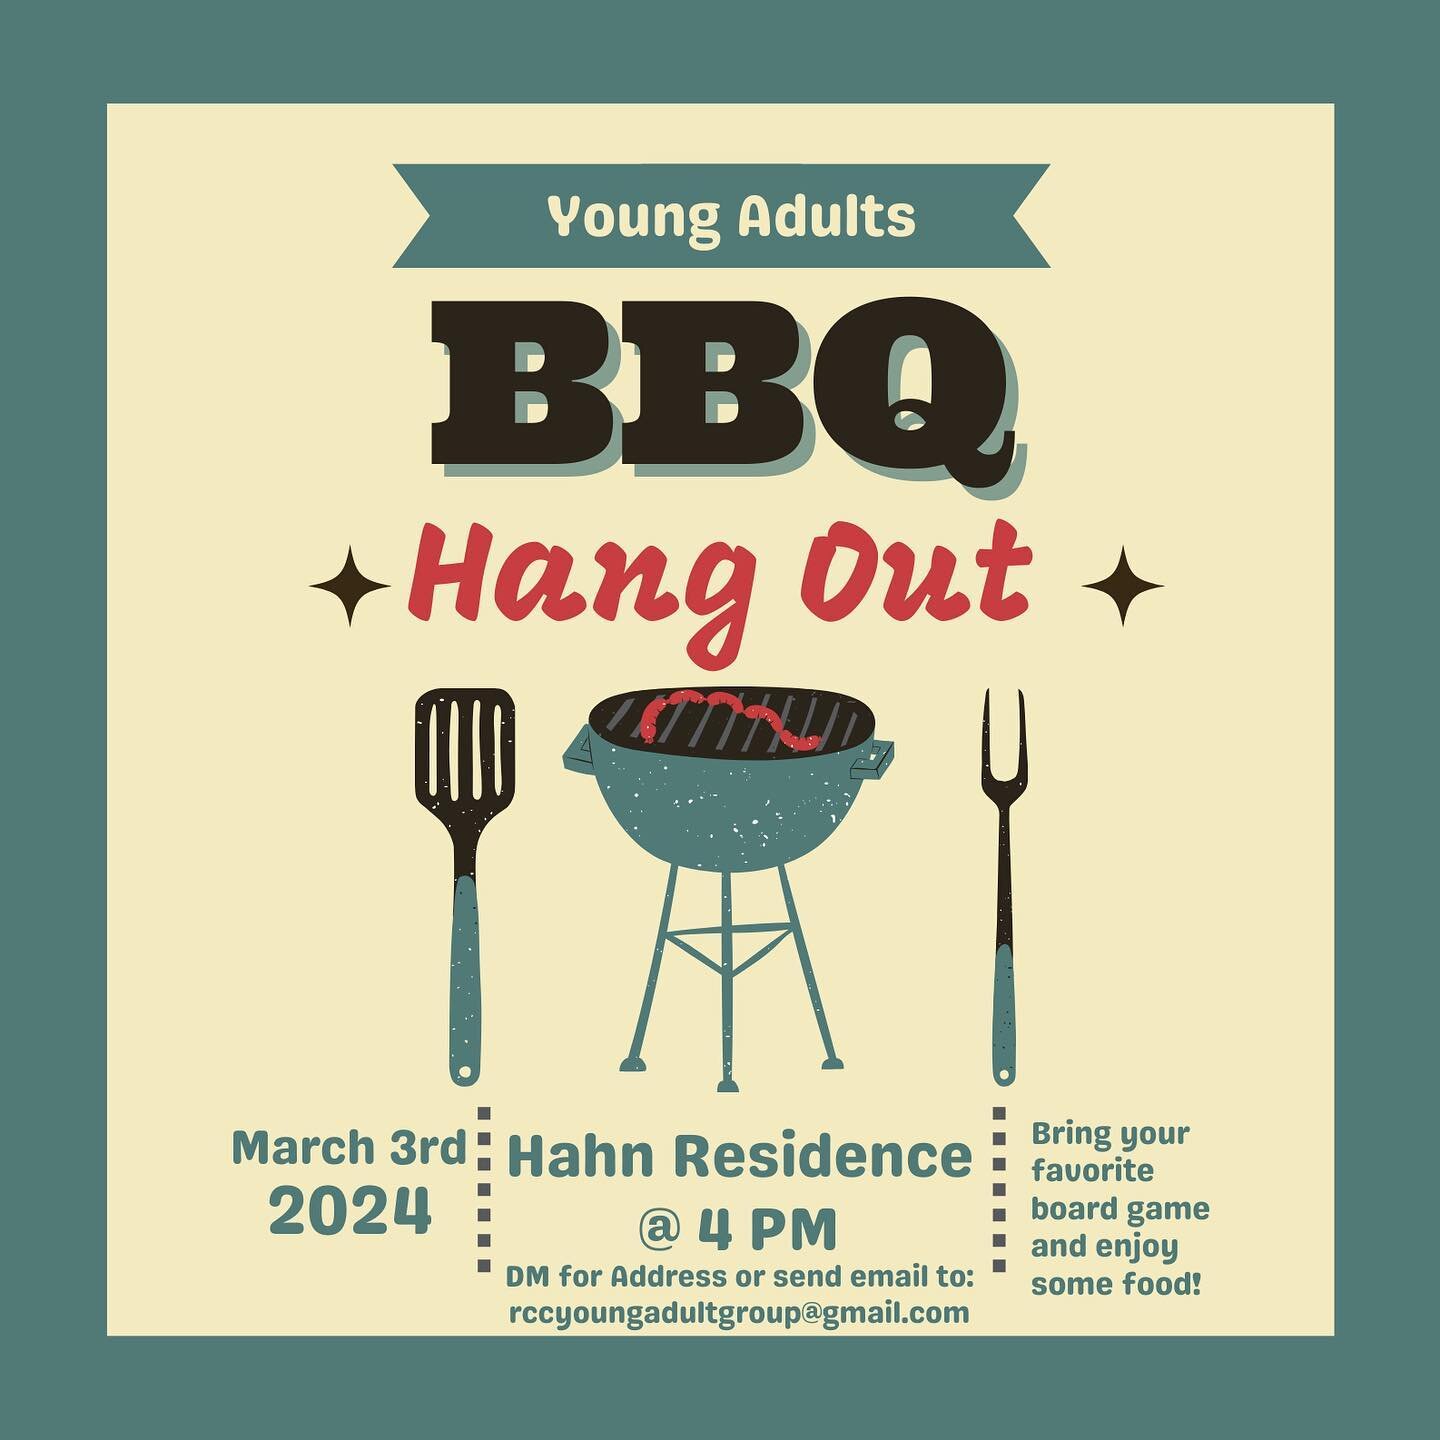 Attention Young Adults! You&rsquo;re invited to a bbq and hang out on March 3. Go follow @rccyoungadultgroup and DM to get the address!